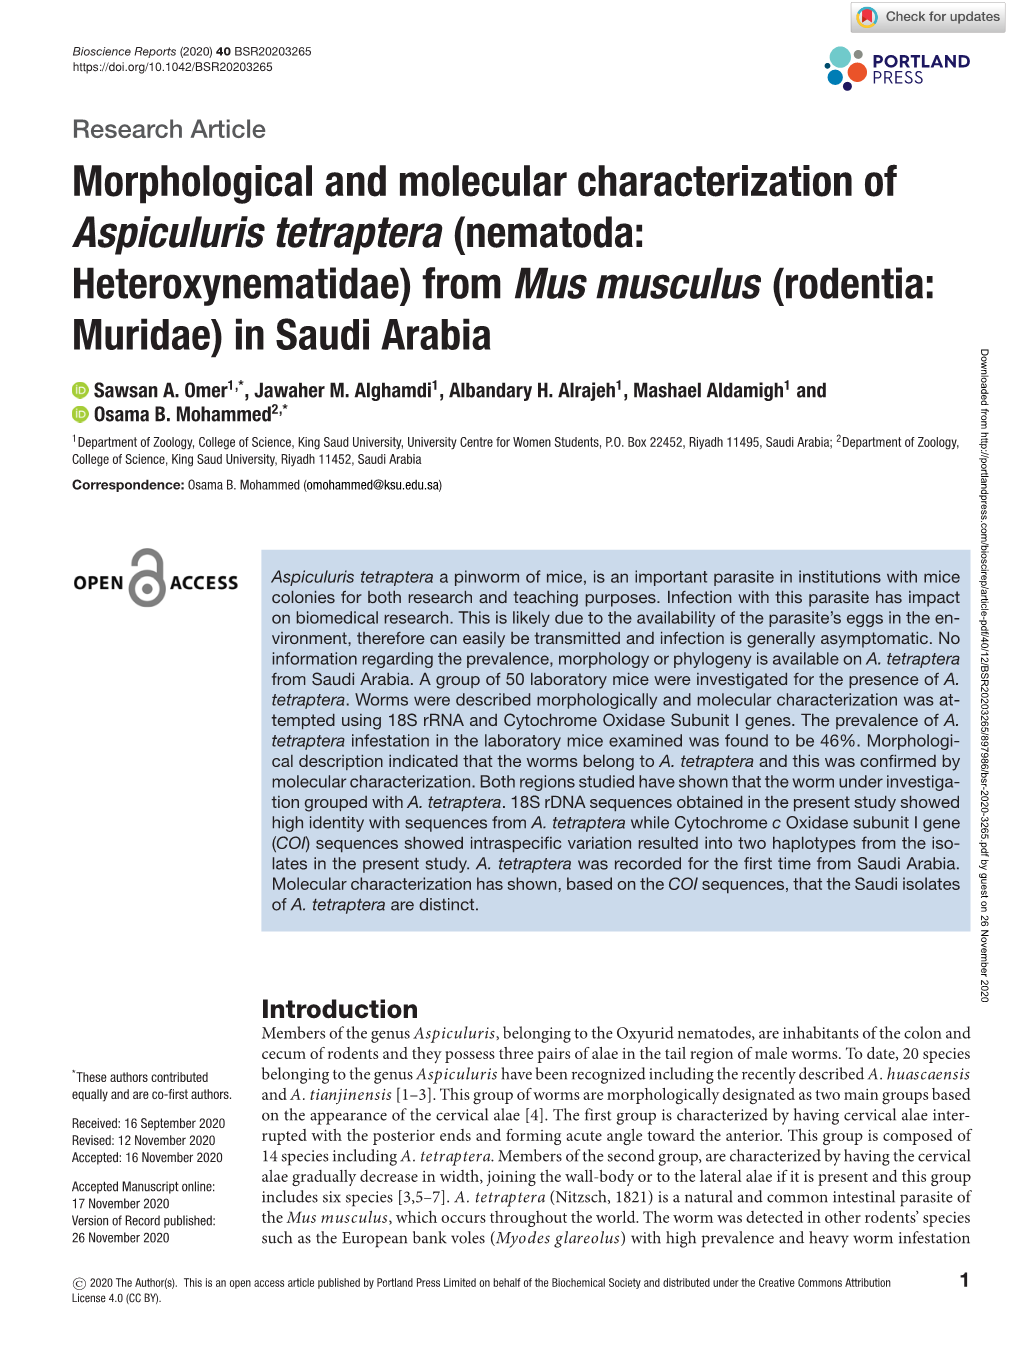 Morphological and Molecular Characterization of Aspiculuris Tetraptera (Nematoda: Heteroxynematidae) from Mus Musculus (Rodentia